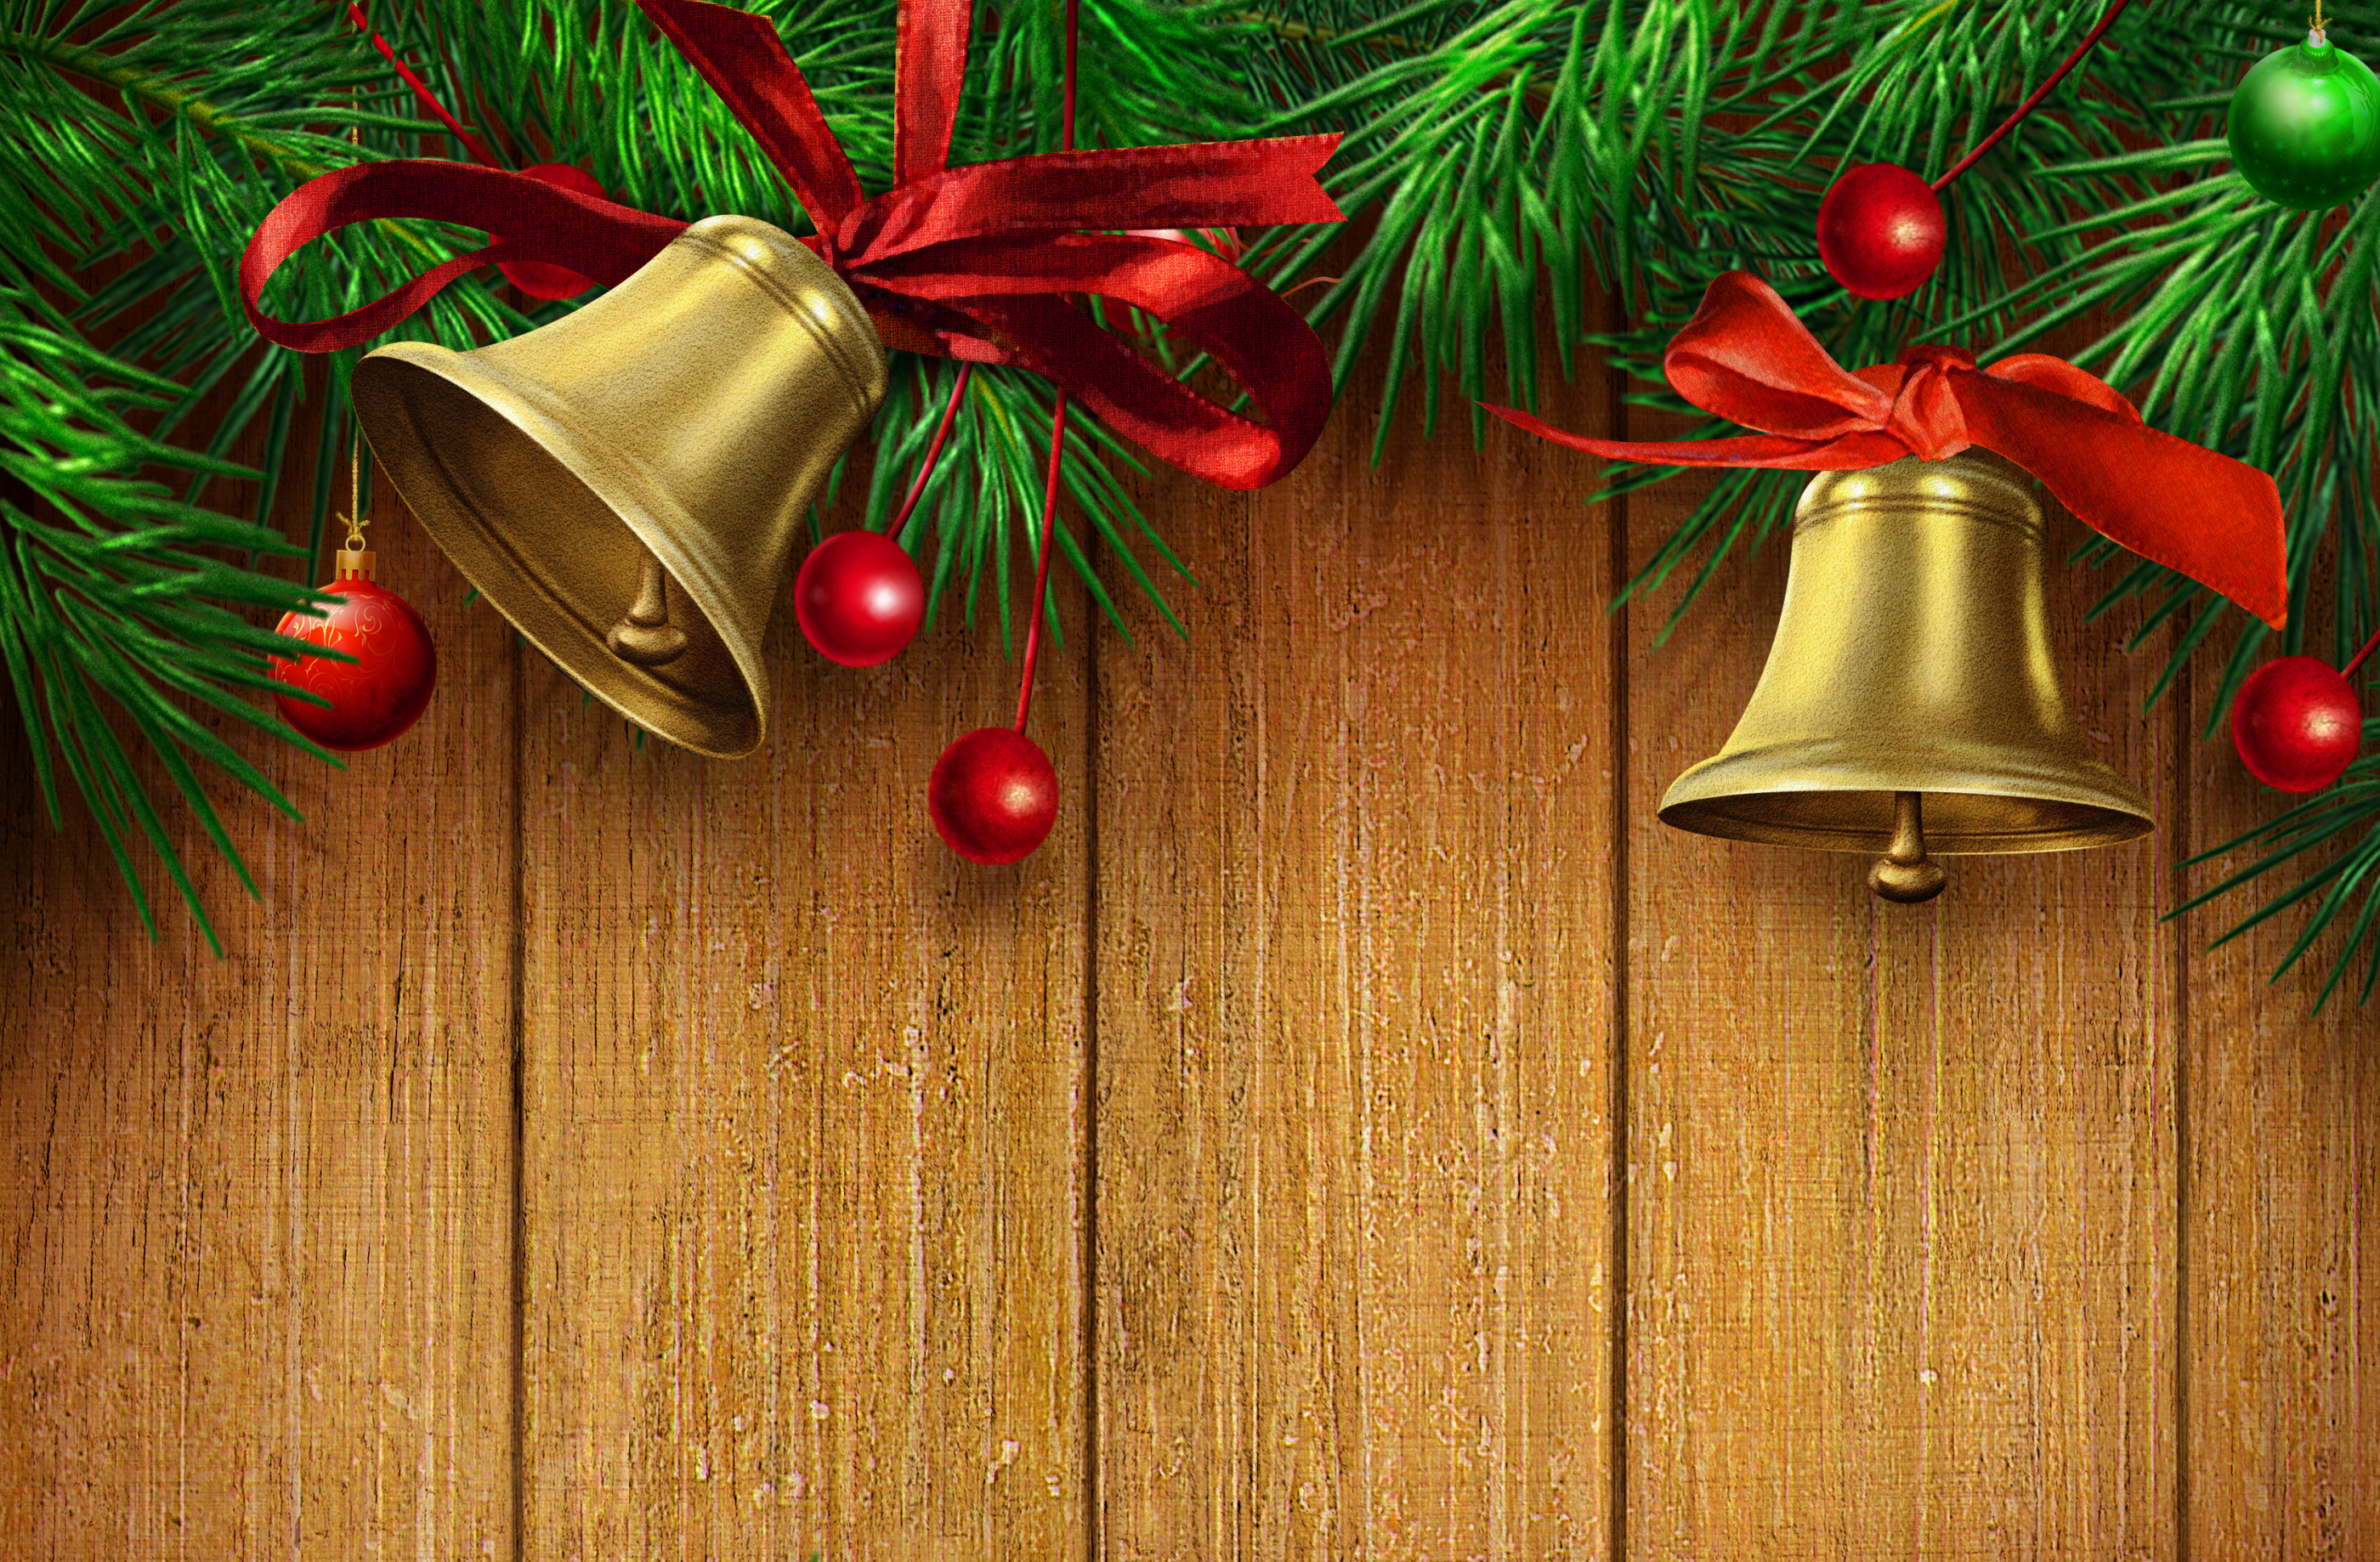 2015 background Christmas - wallpapers, images, photos, pictures ...